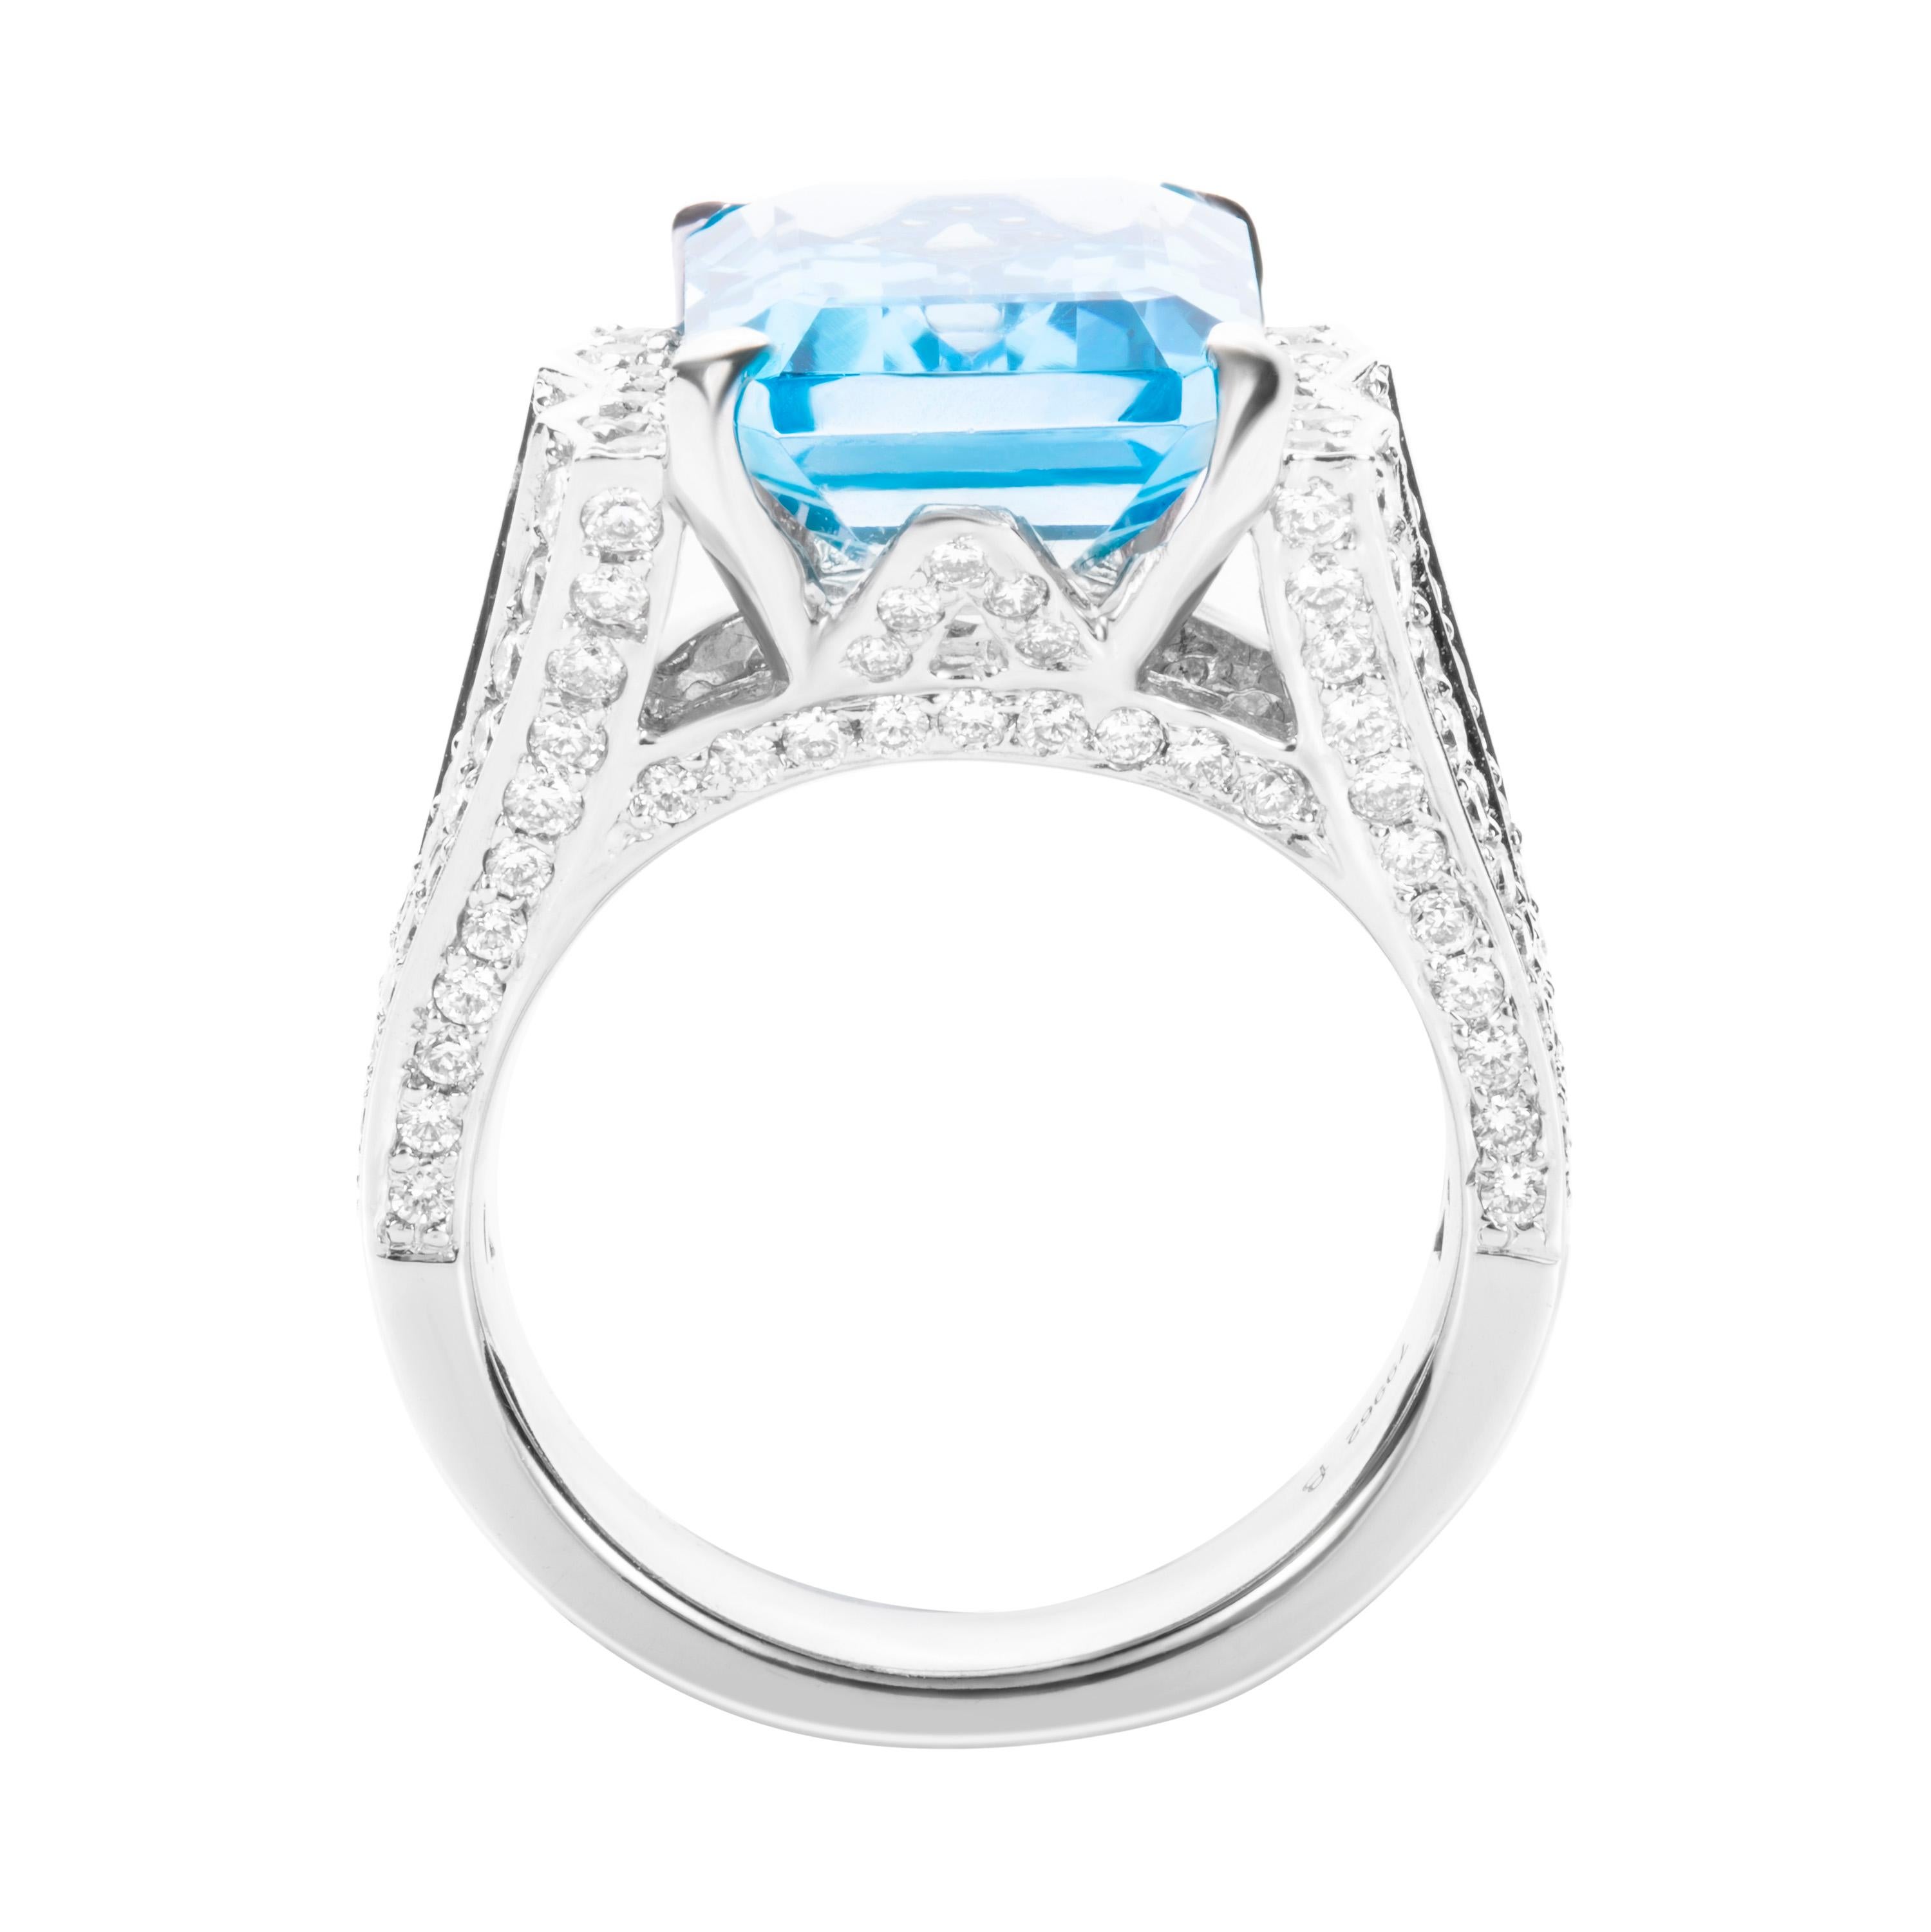 11.23 Carat Emerald Cut Blue Topaz Diamond 18 Karat White Gold Cocktail Ring In New Condition For Sale In Hong Kong, Kowloon